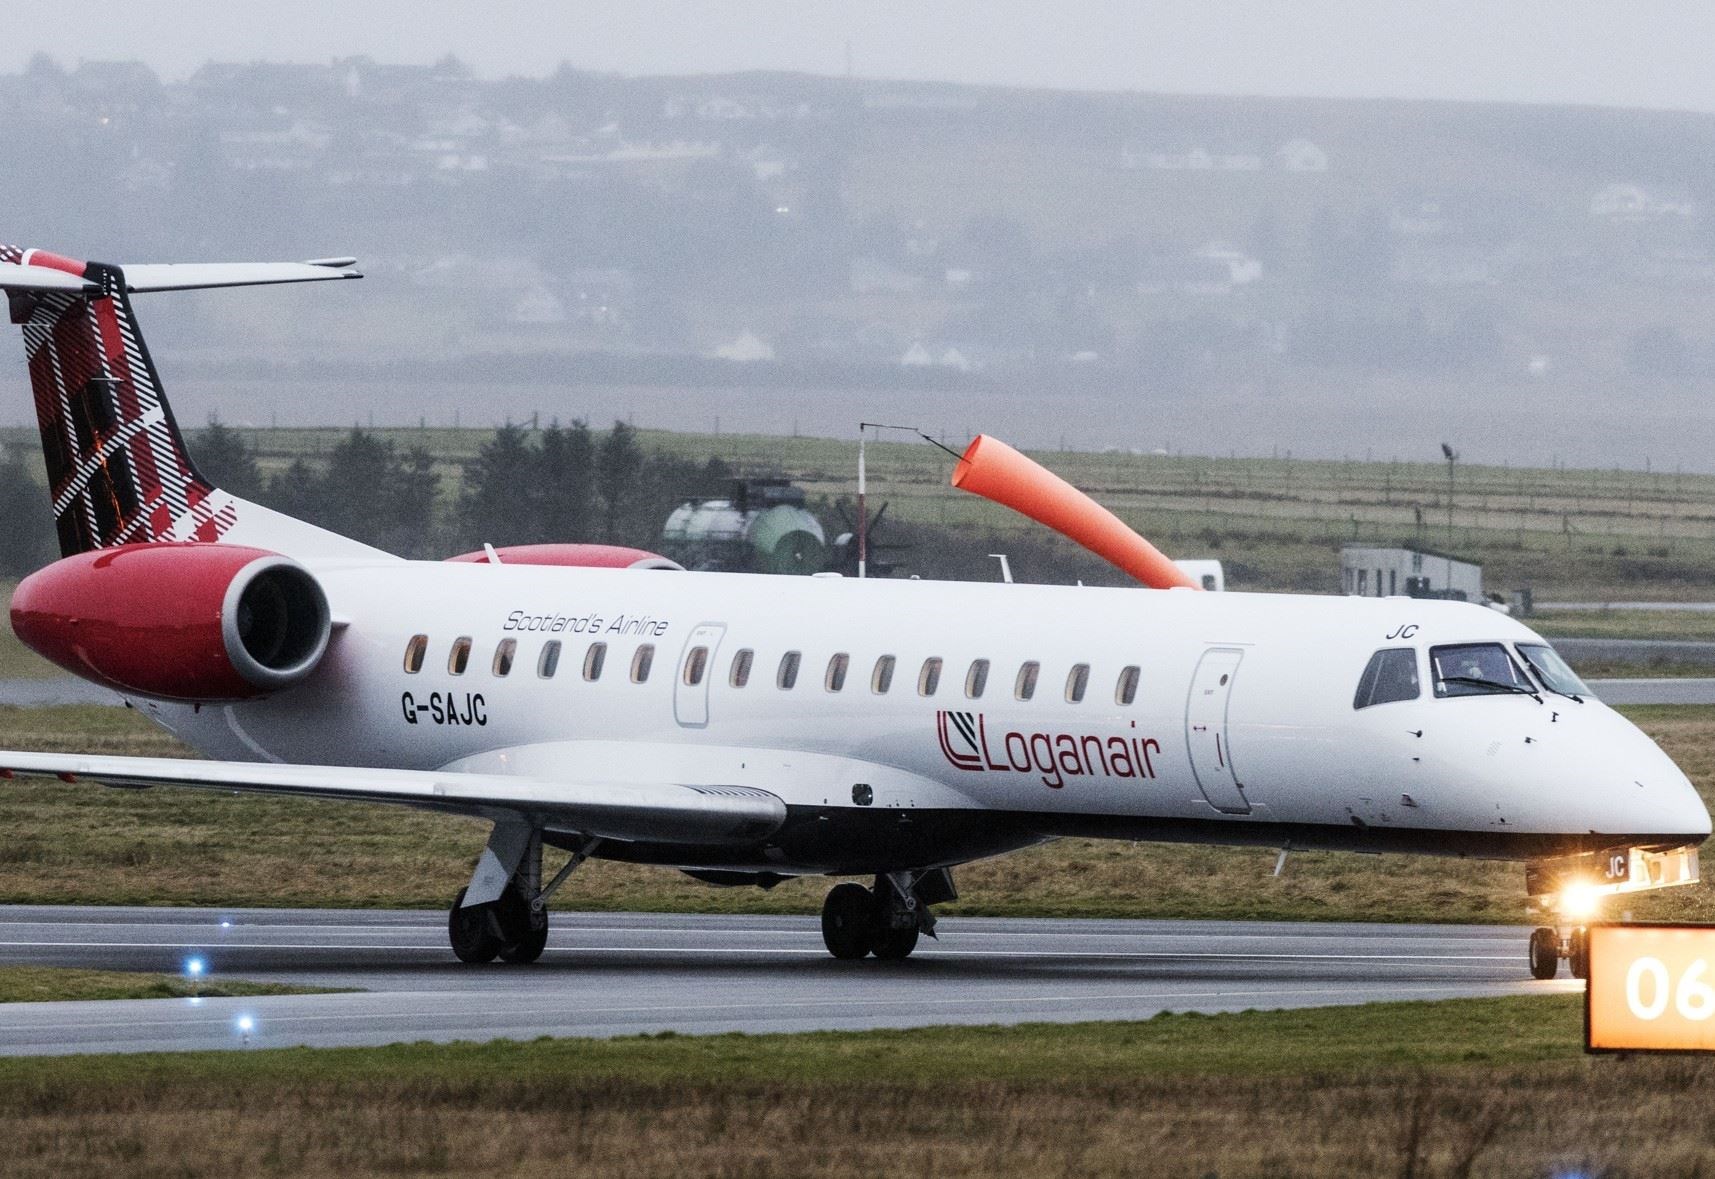 The Loganair Embraer 145 which will service the new Inverness-EastMidlands route.